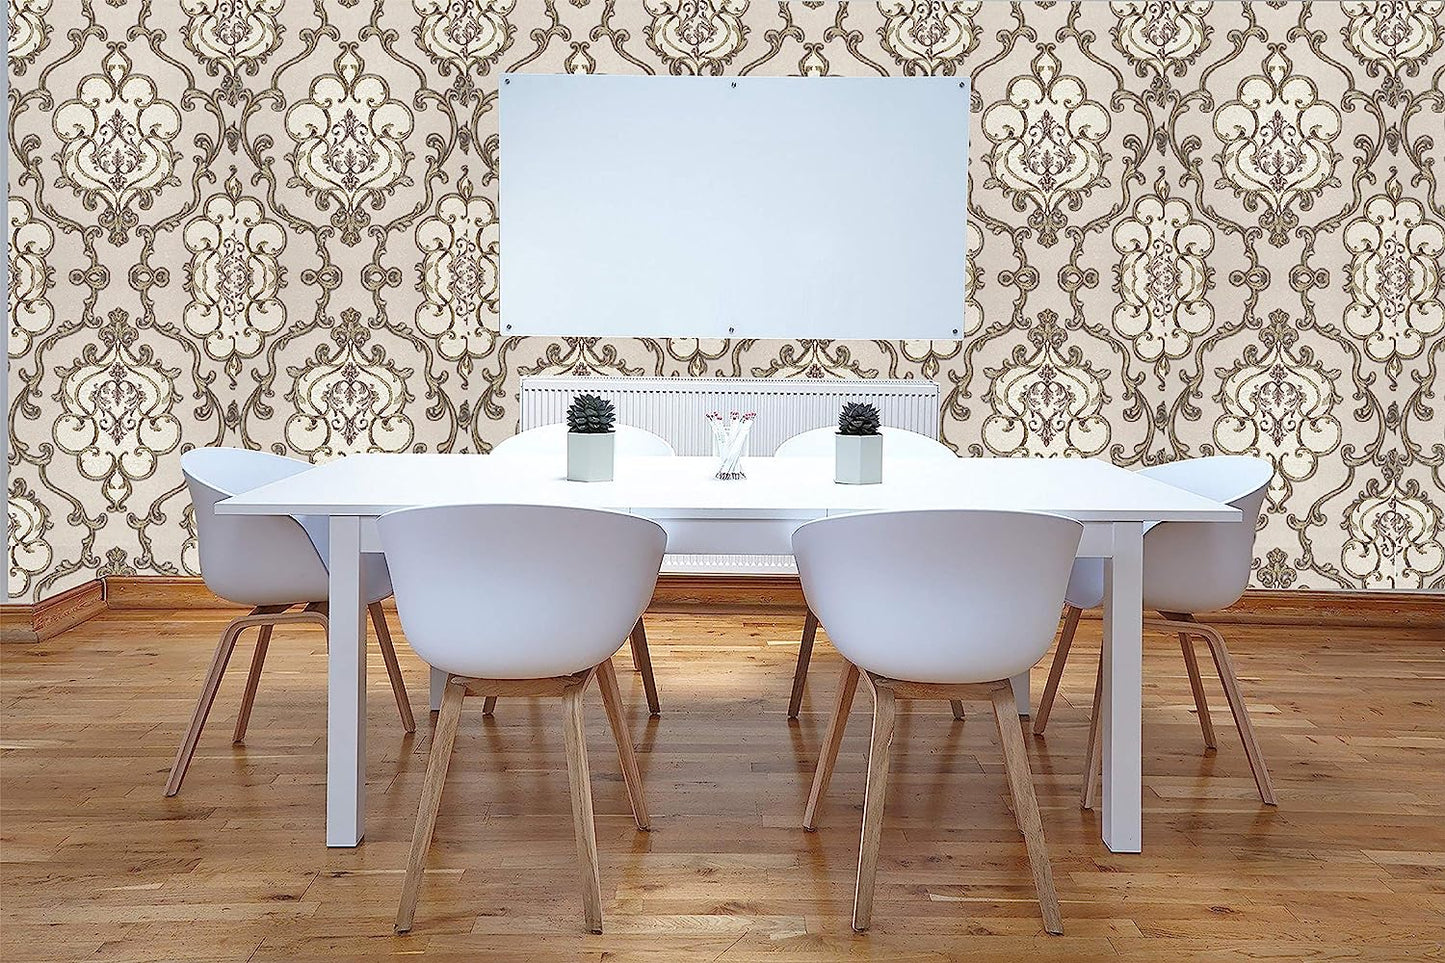 3D Latest Ivory Damask Design Brown Wallpaper Roll for Home Walls 57 Sq Ft (0.53m  or 33 Feet)